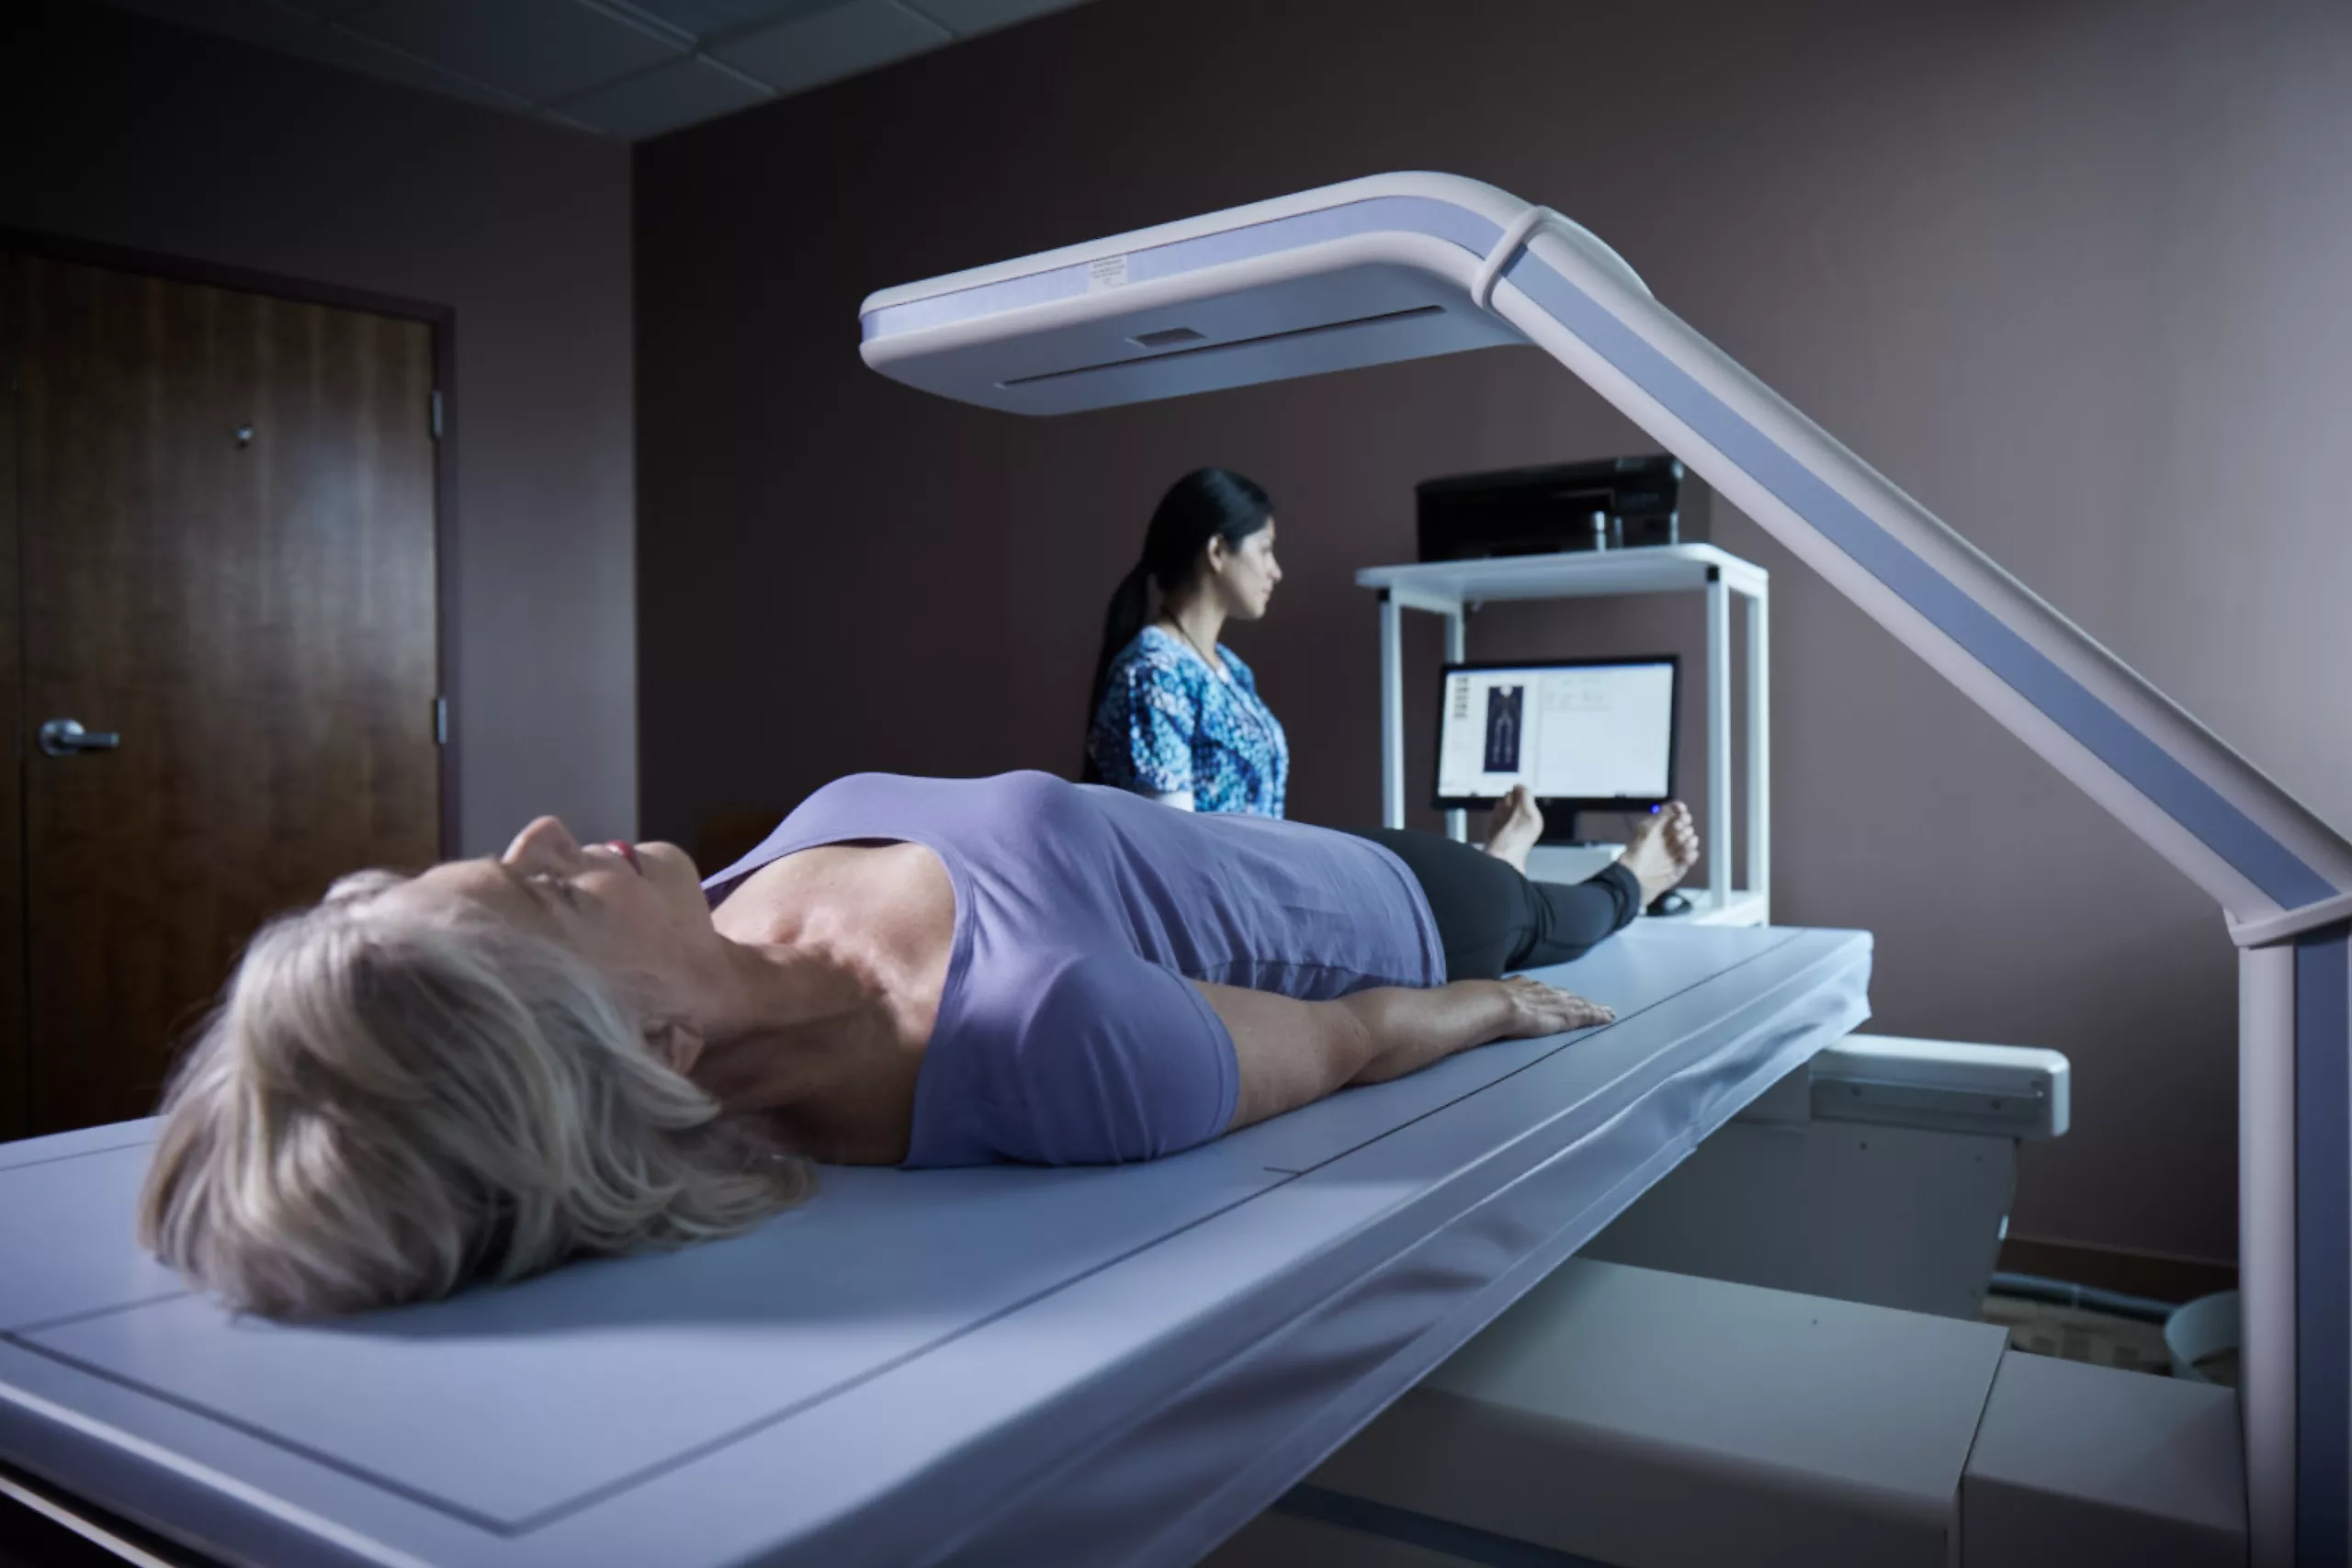 Patient lays on scanning table in lab setting.